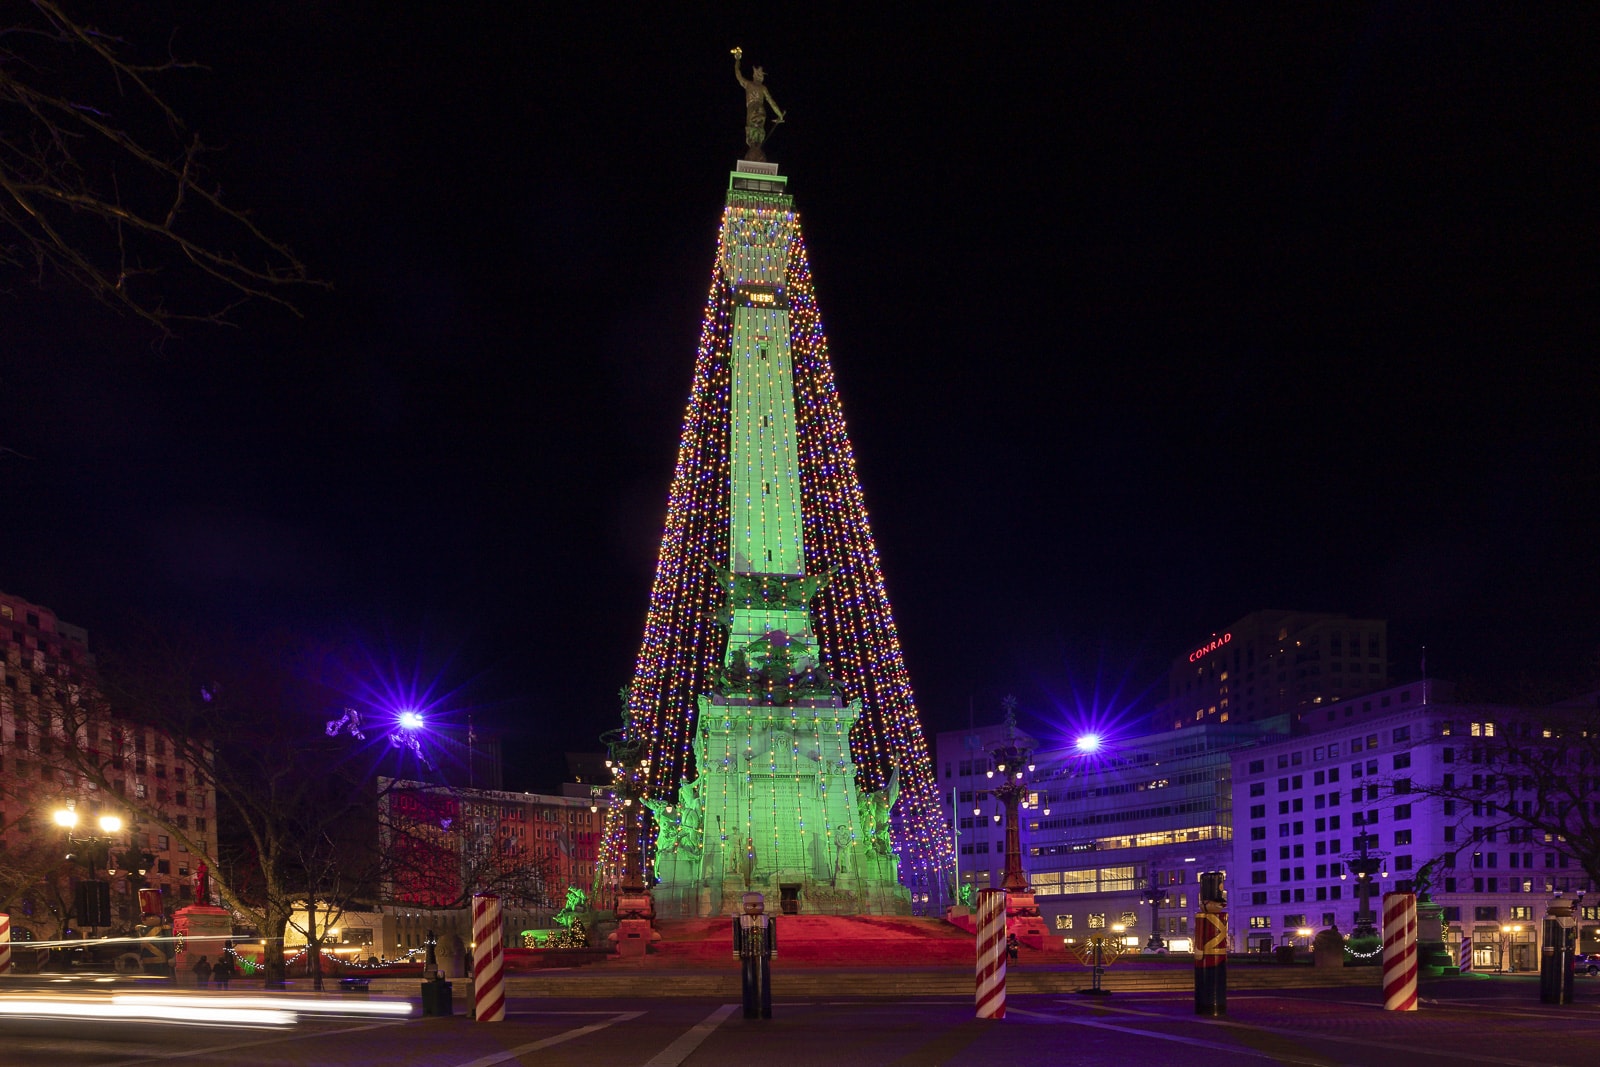 The "World's Largest Christmas Tree" In Indianapolis At Night